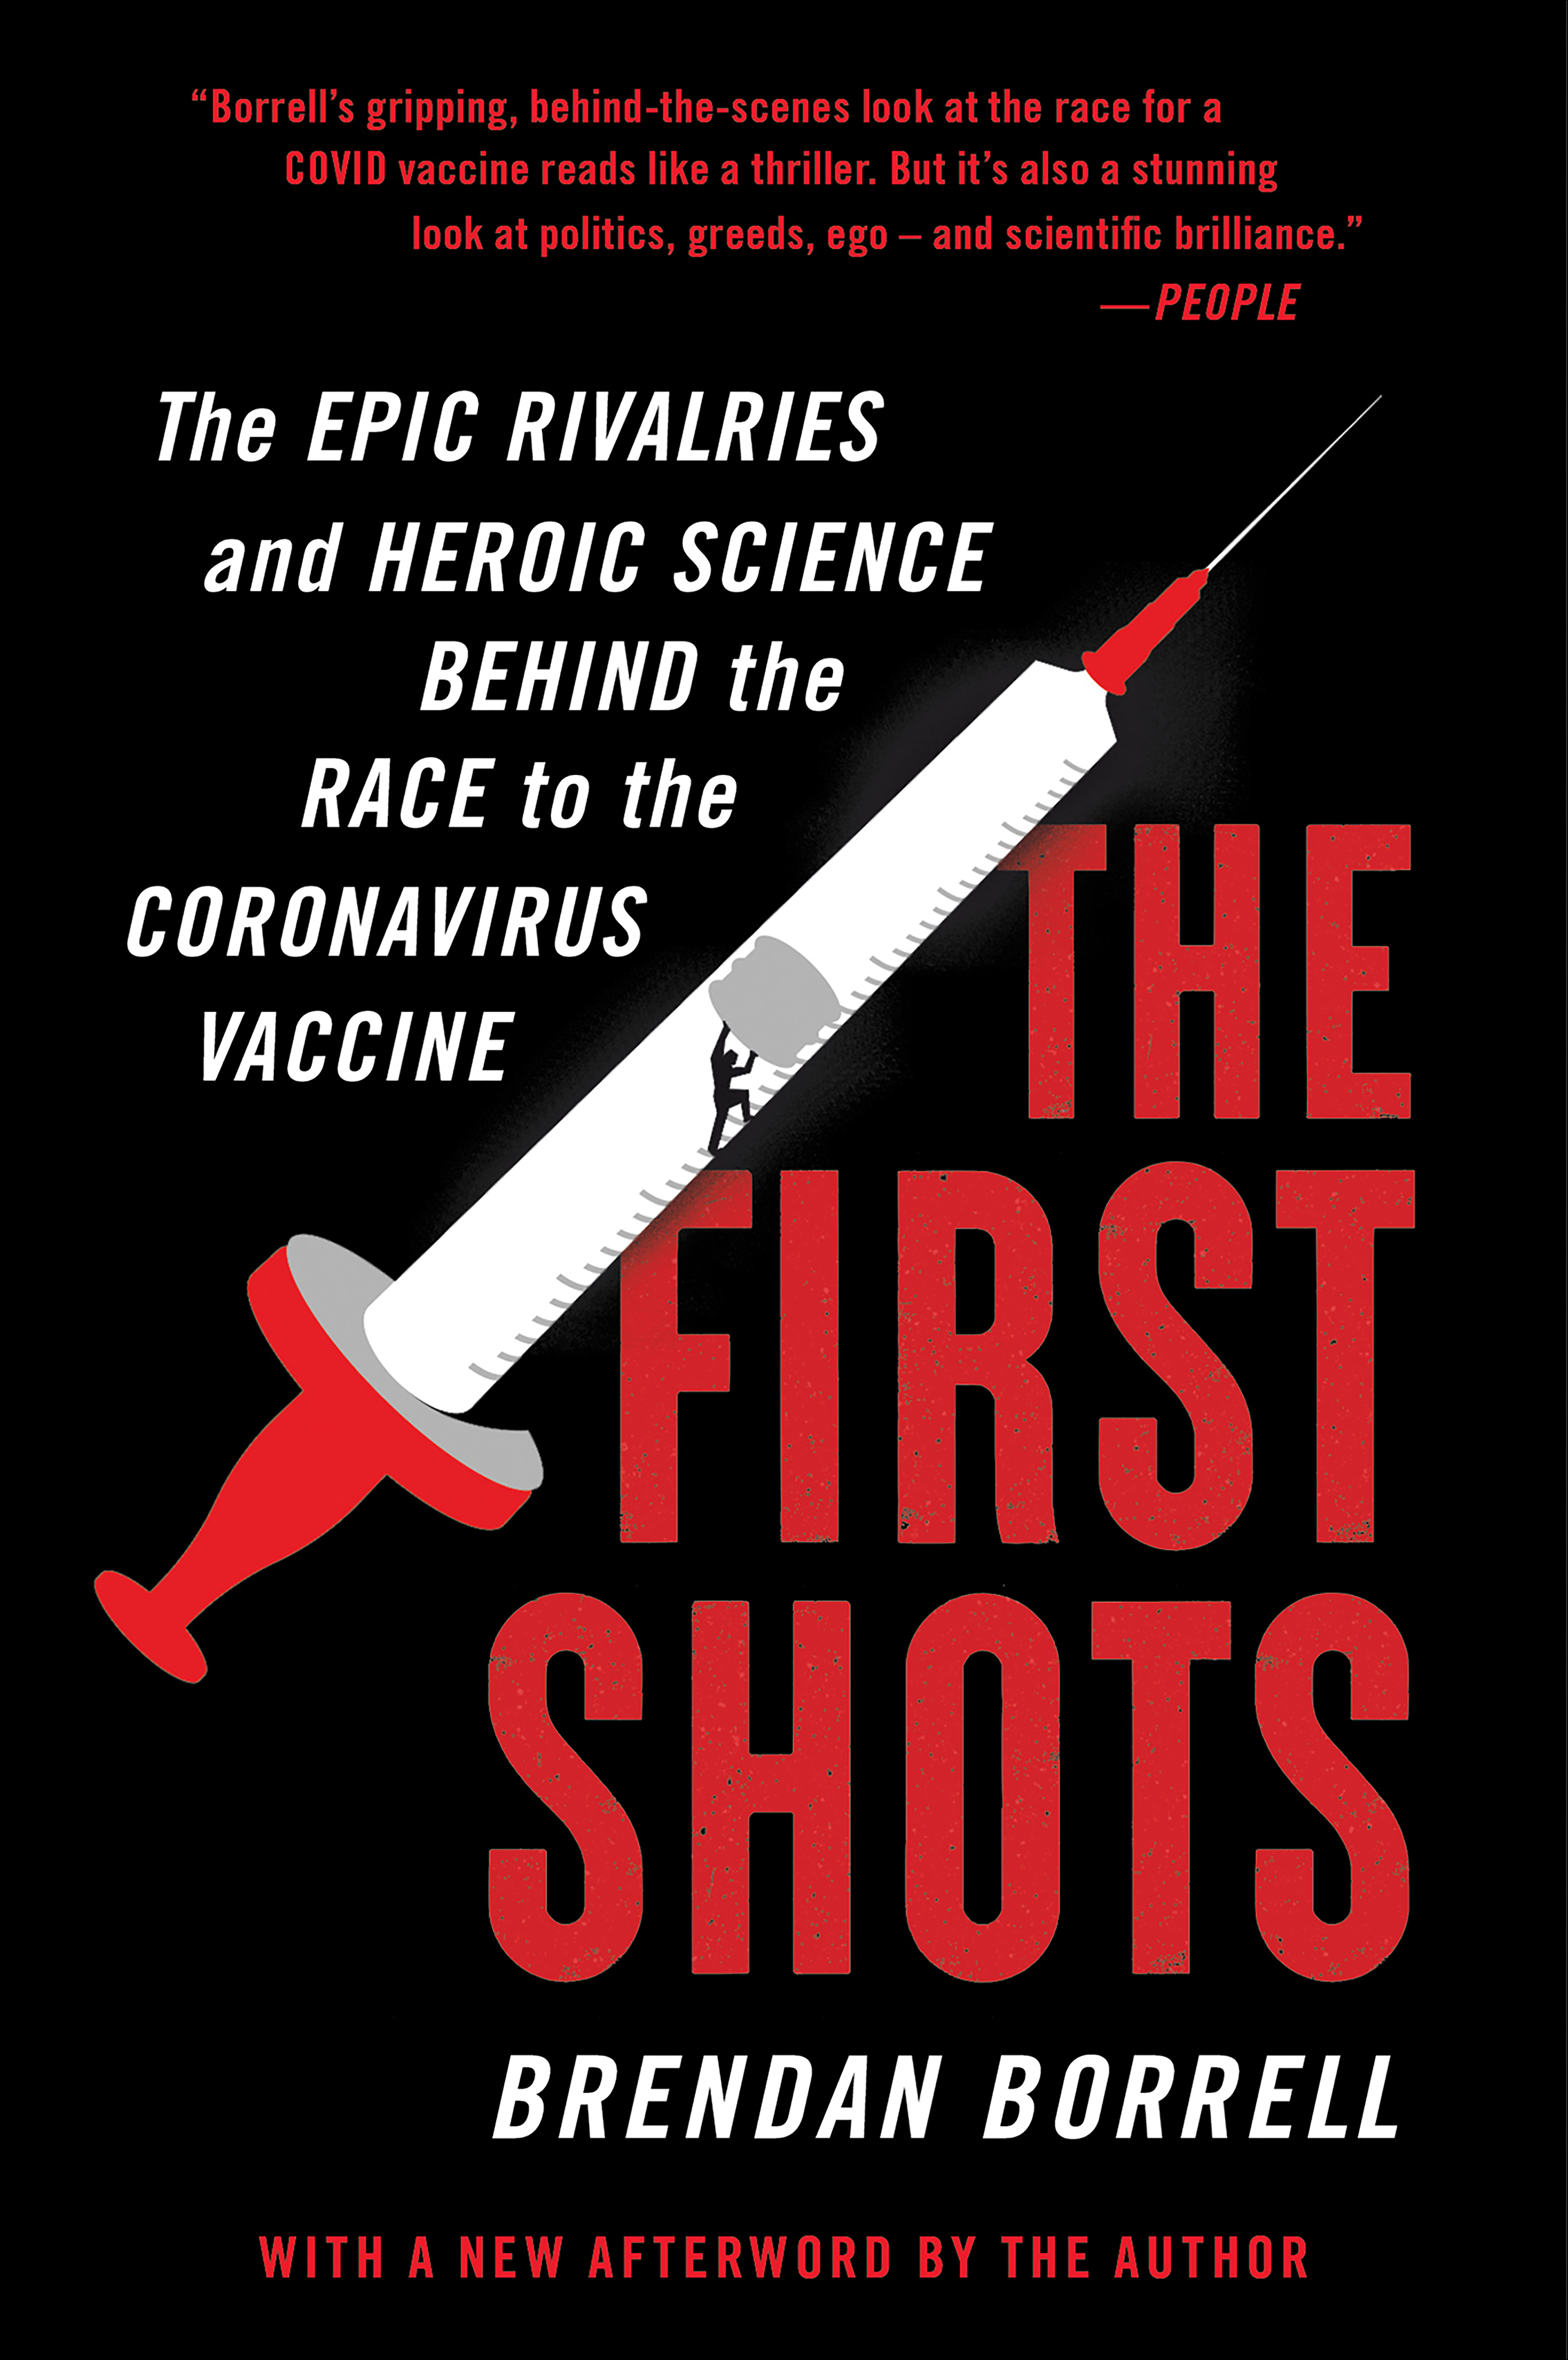 Image de couverture de The First Shots [electronic resource] : The Epic Rivalries and Heroic Science Behind the Race to the Coronavirus Vaccine